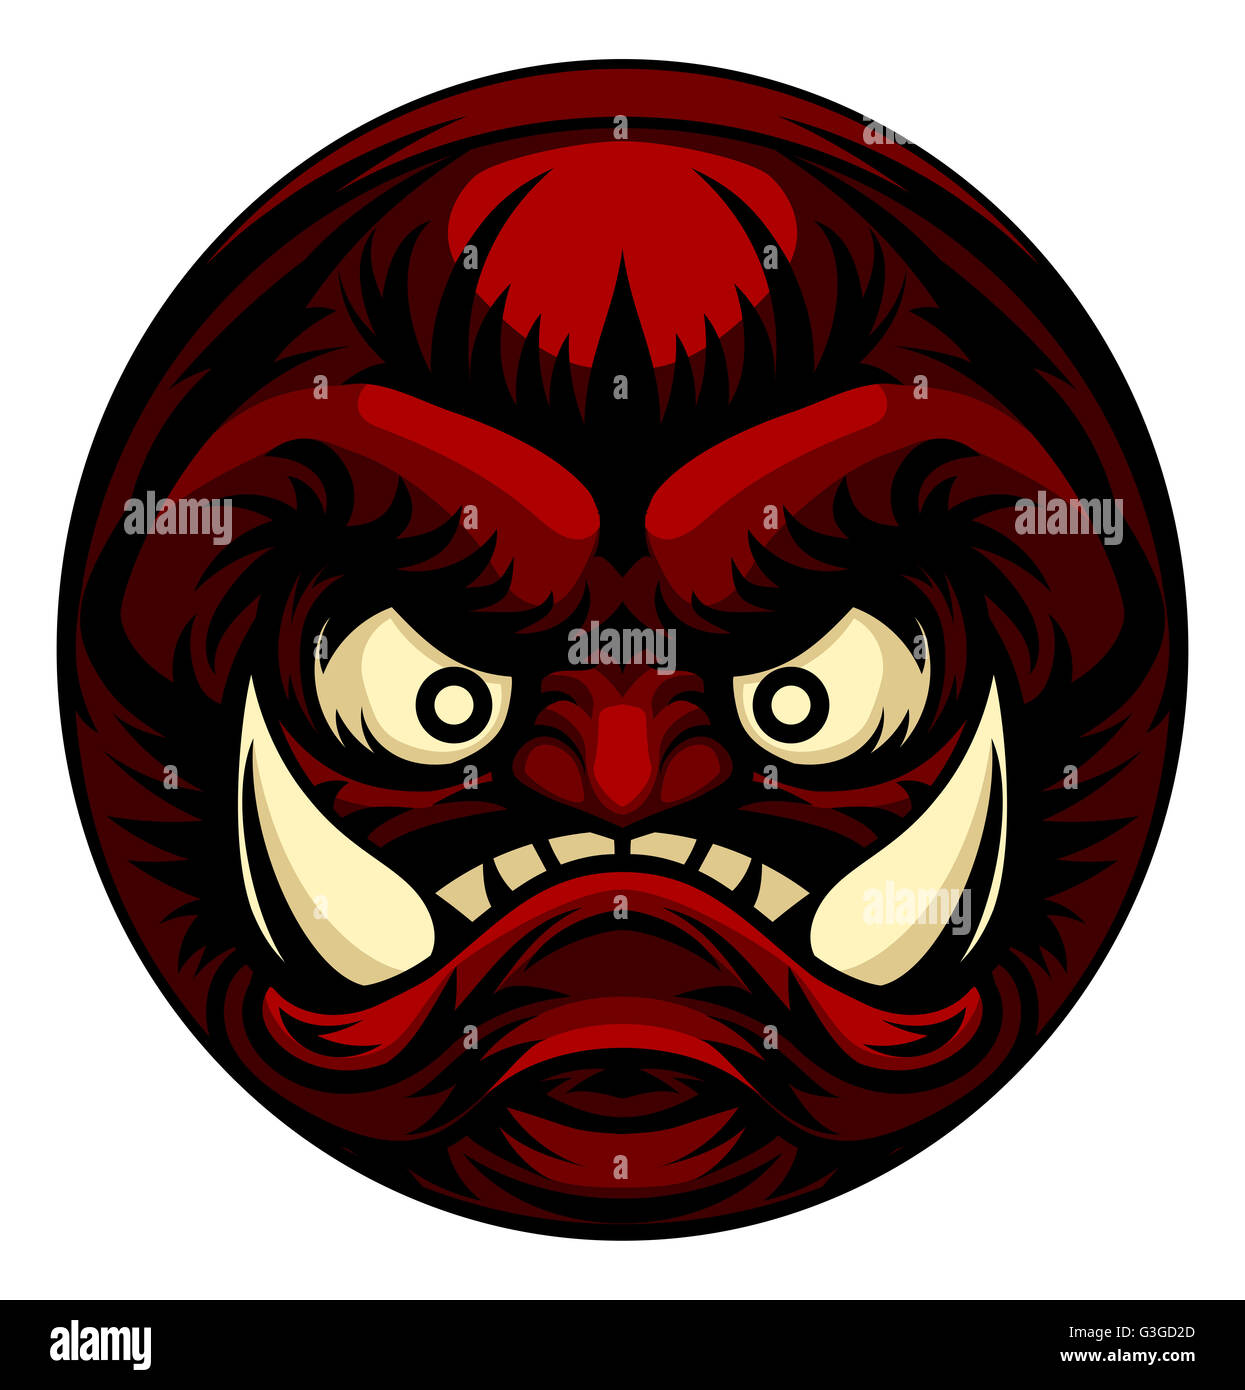 An illustration of a stylised troll or other monster face emoticon icon Stock Photo